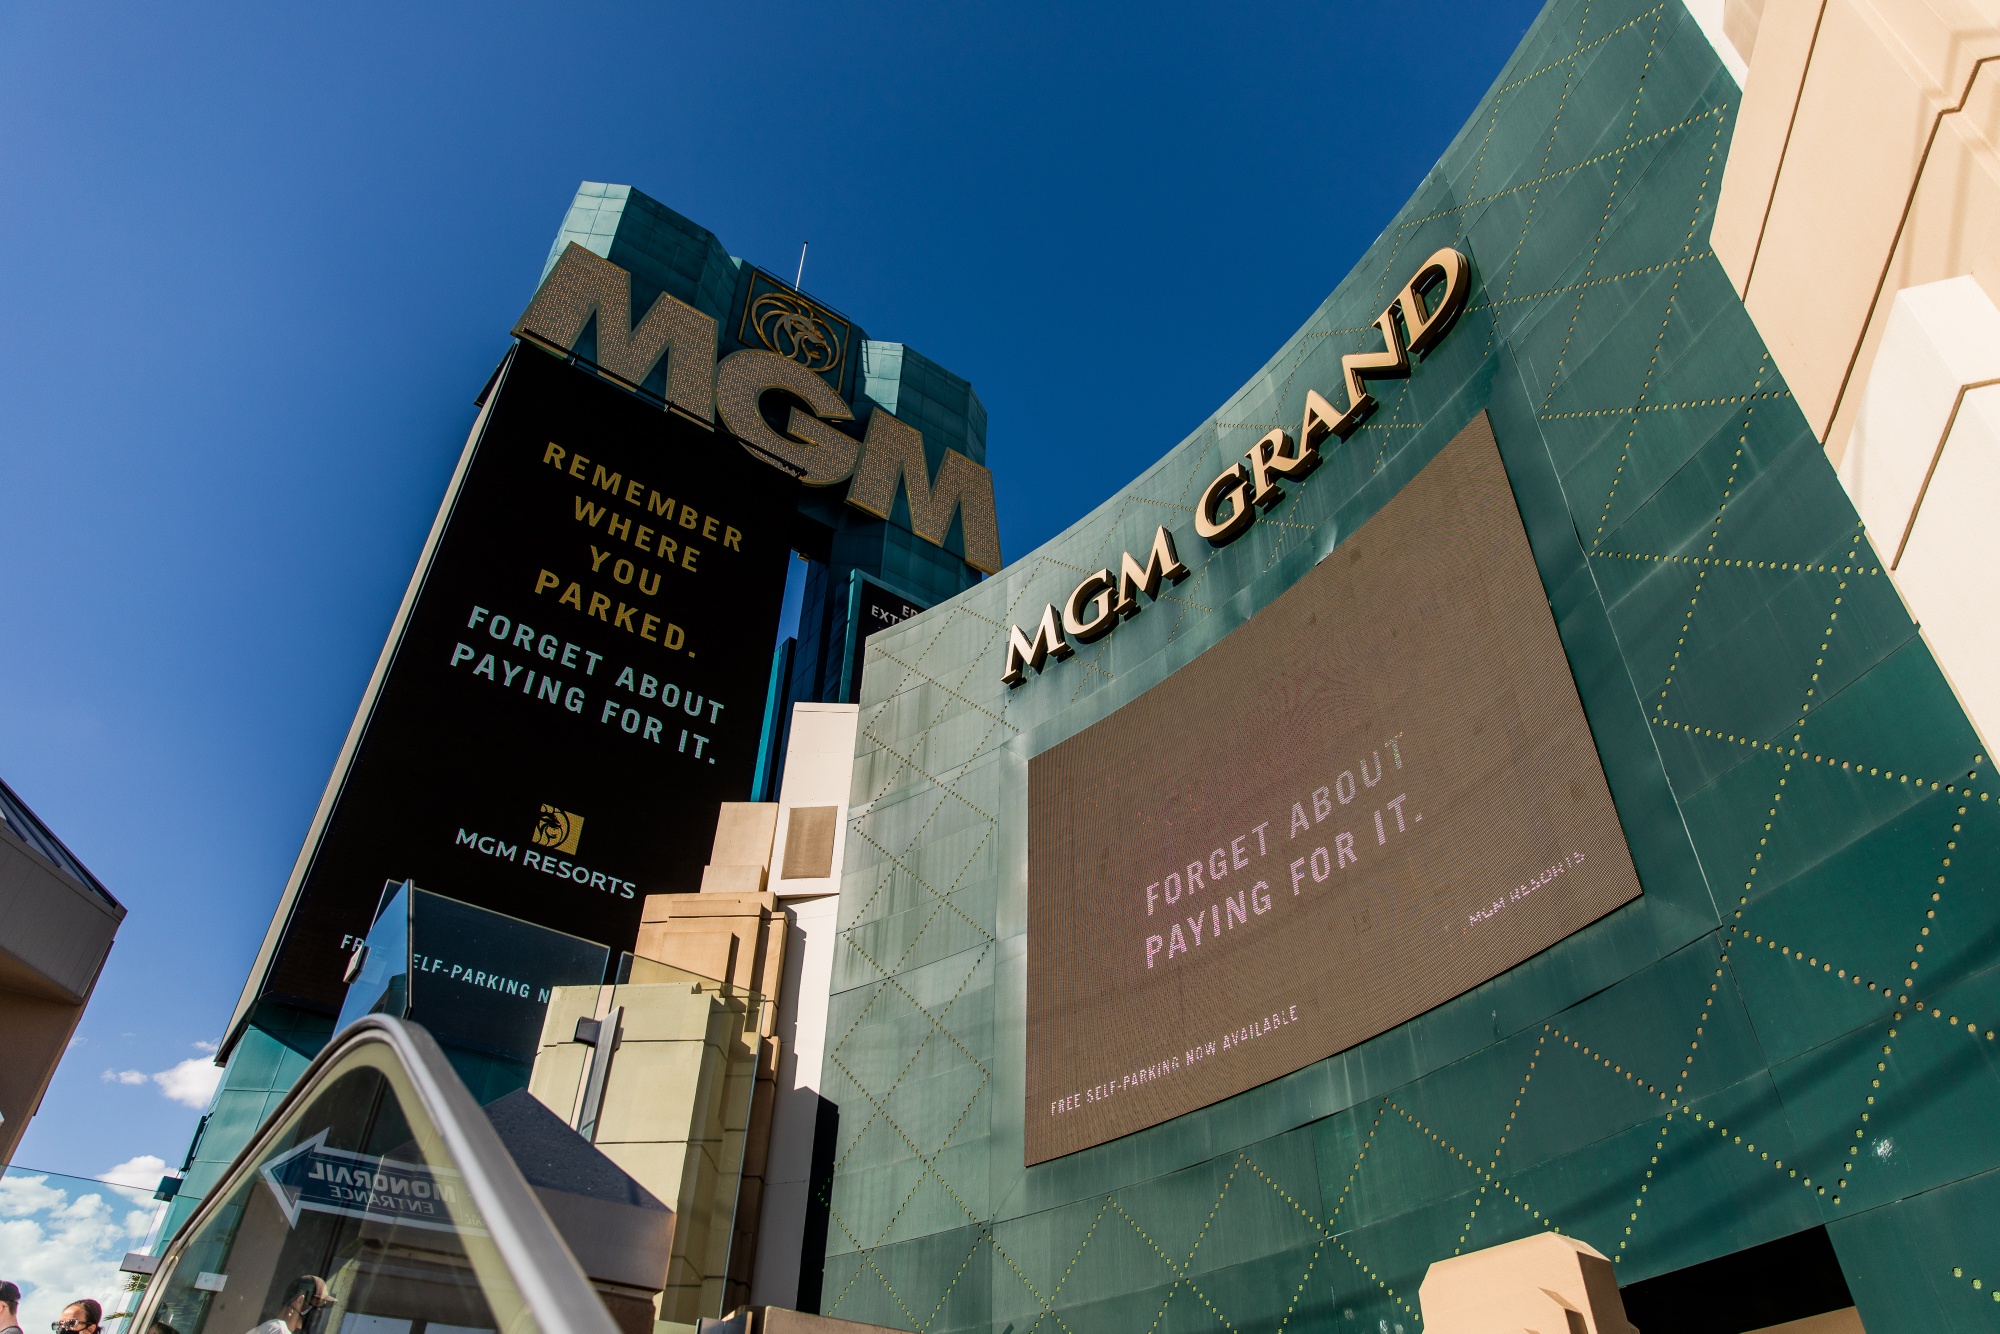 New York-New York, Bellagio could be first MGM properties to reopen